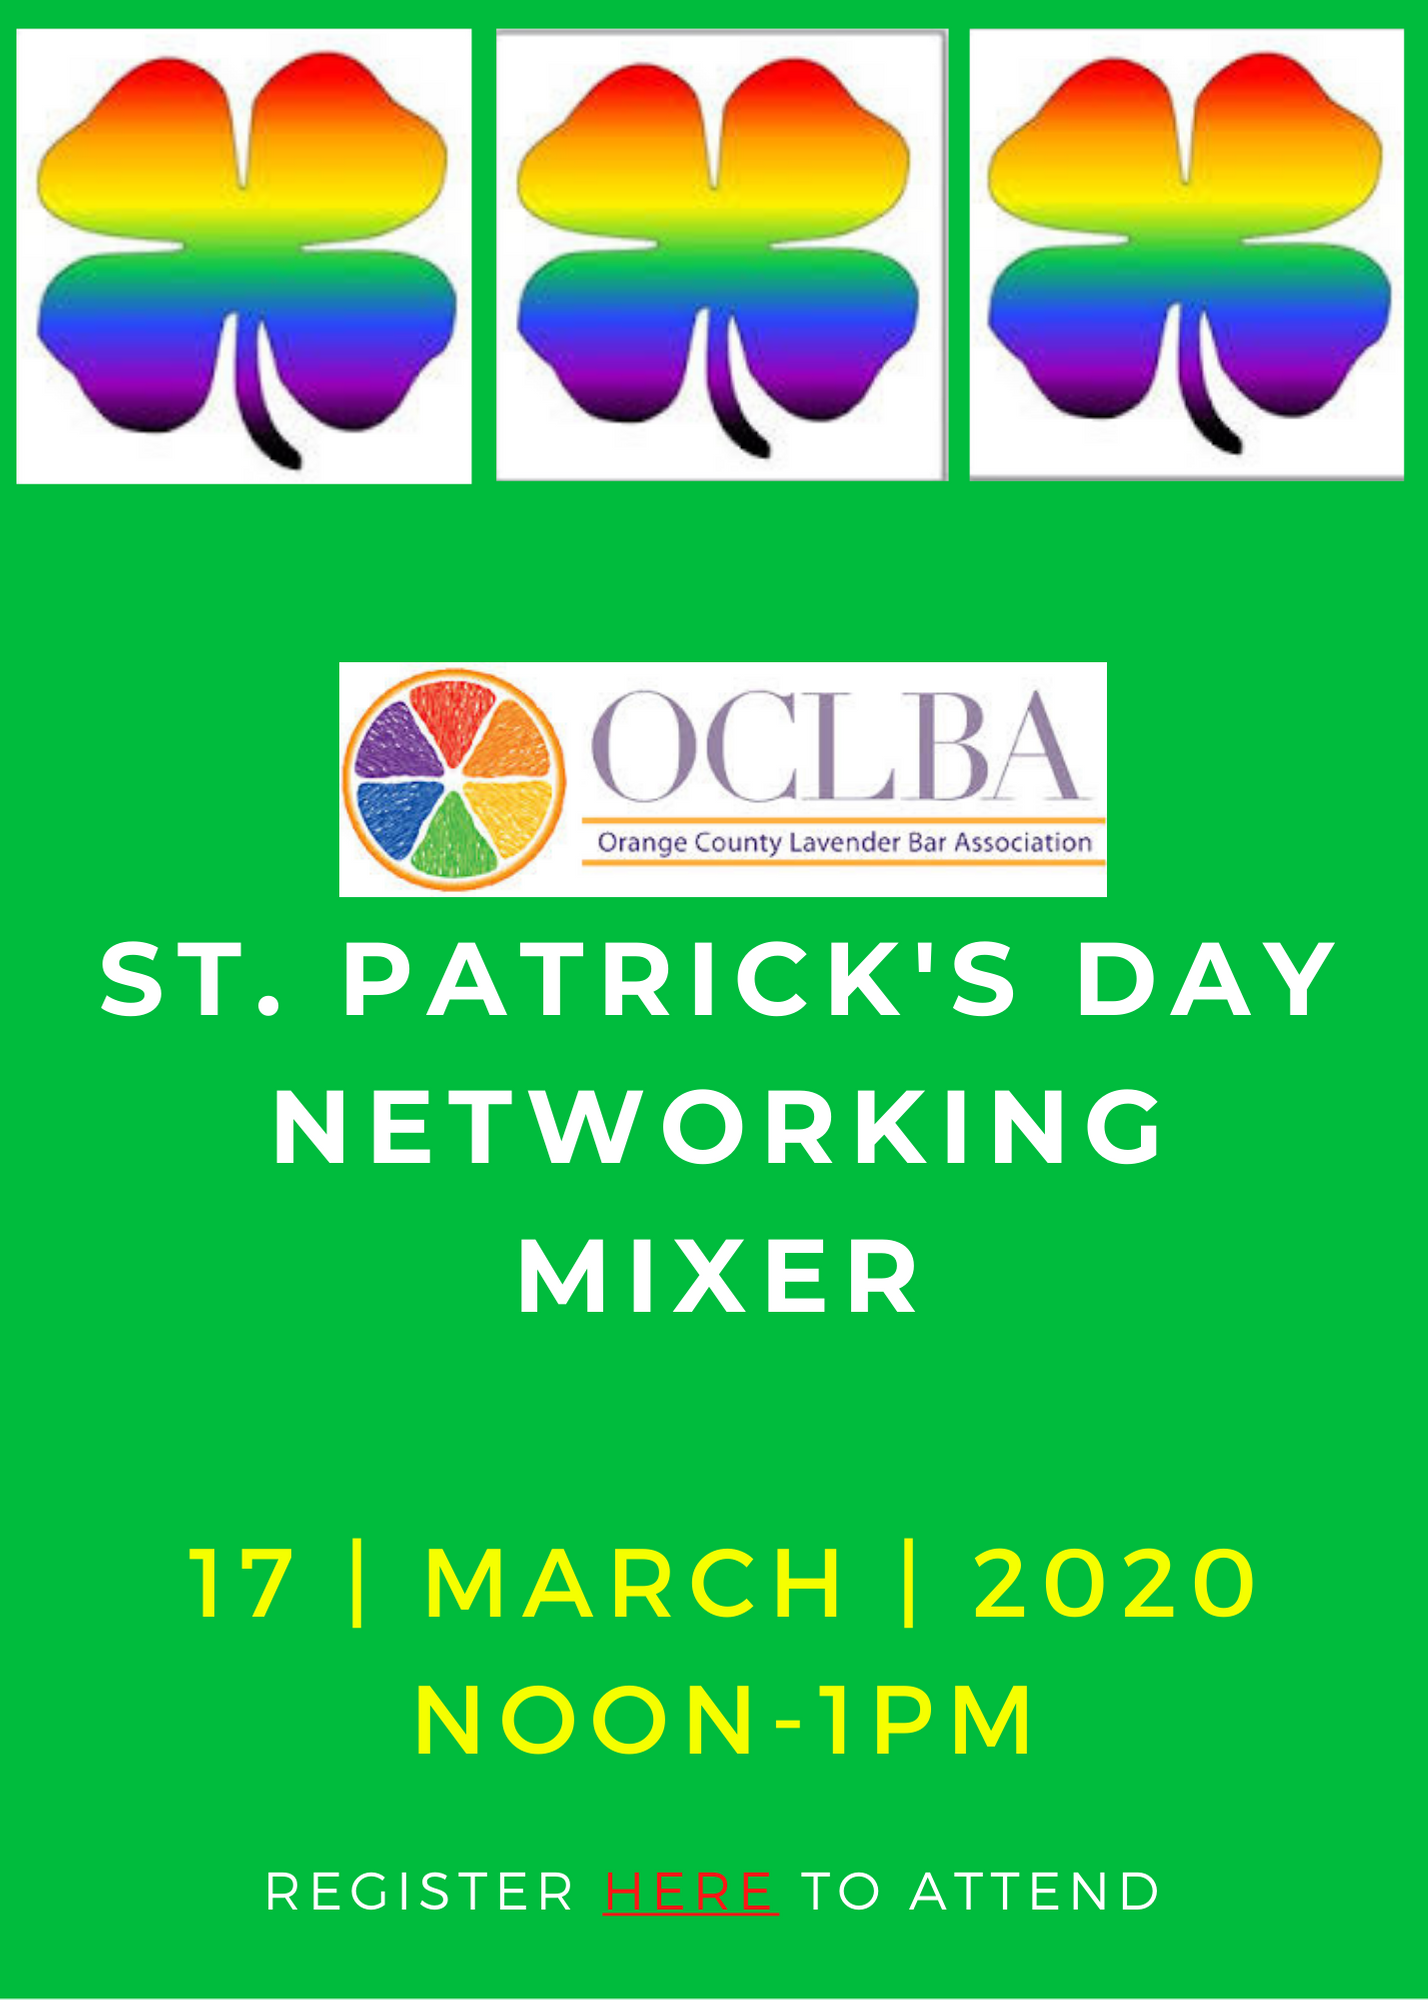 St. Patrick's Day Networking Mixer